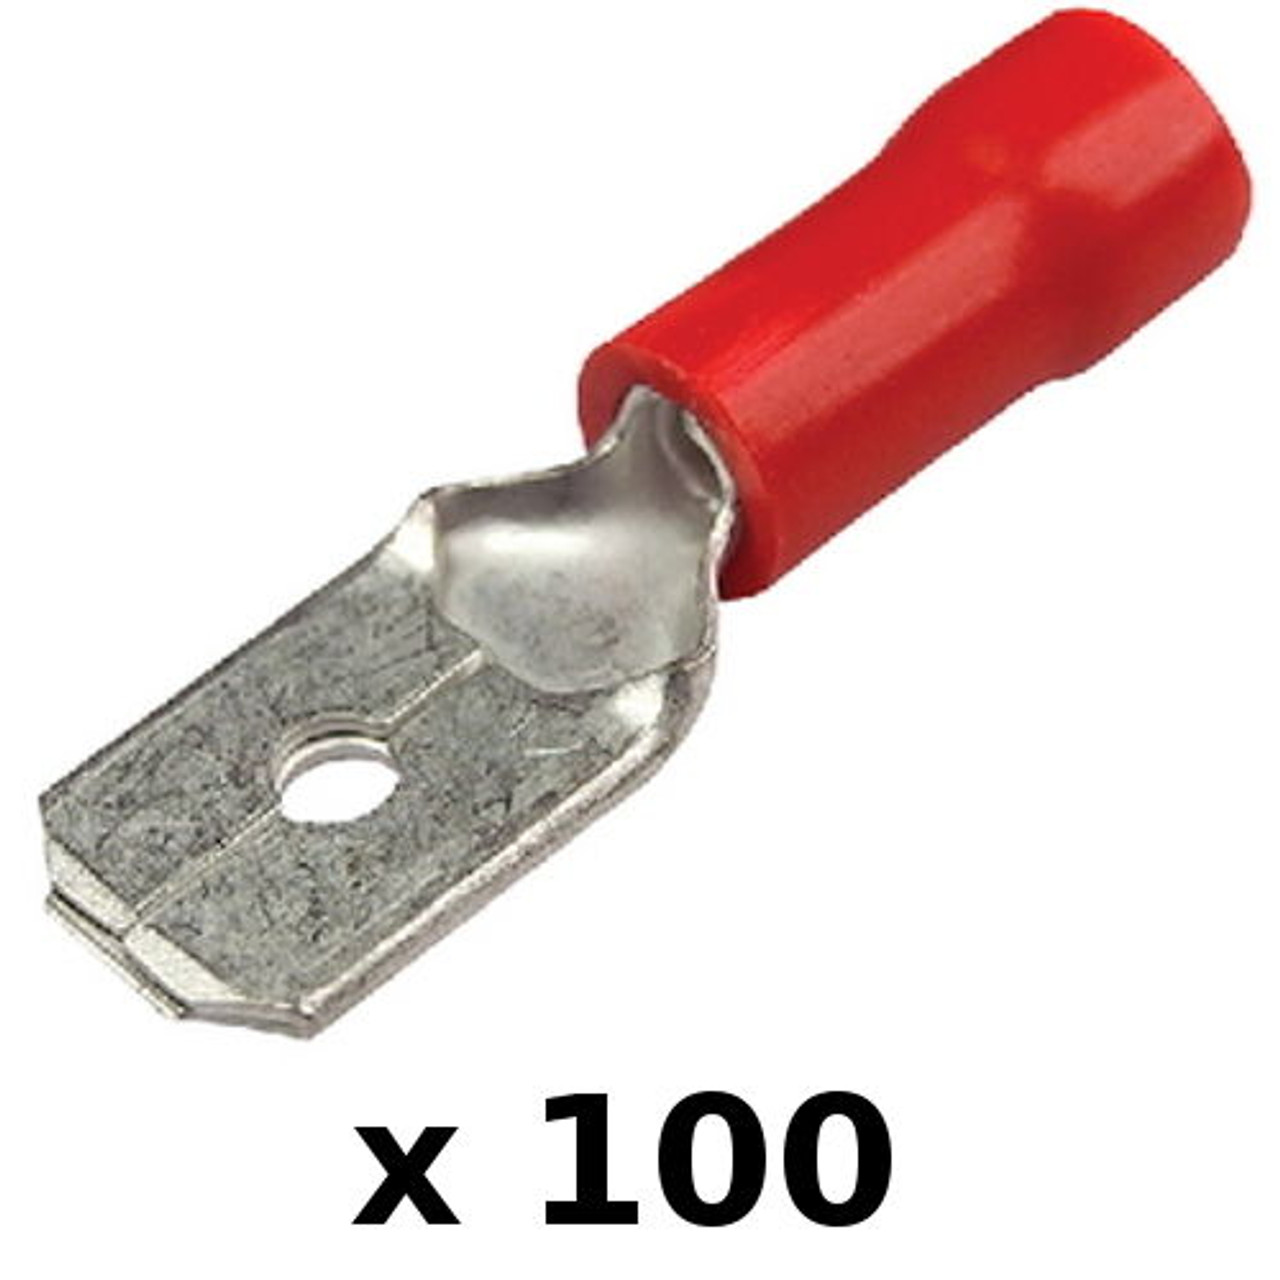 100 Pack Red 22-18 AWG Nylon Insulated 0.25" Male Spade Terminals for Boats